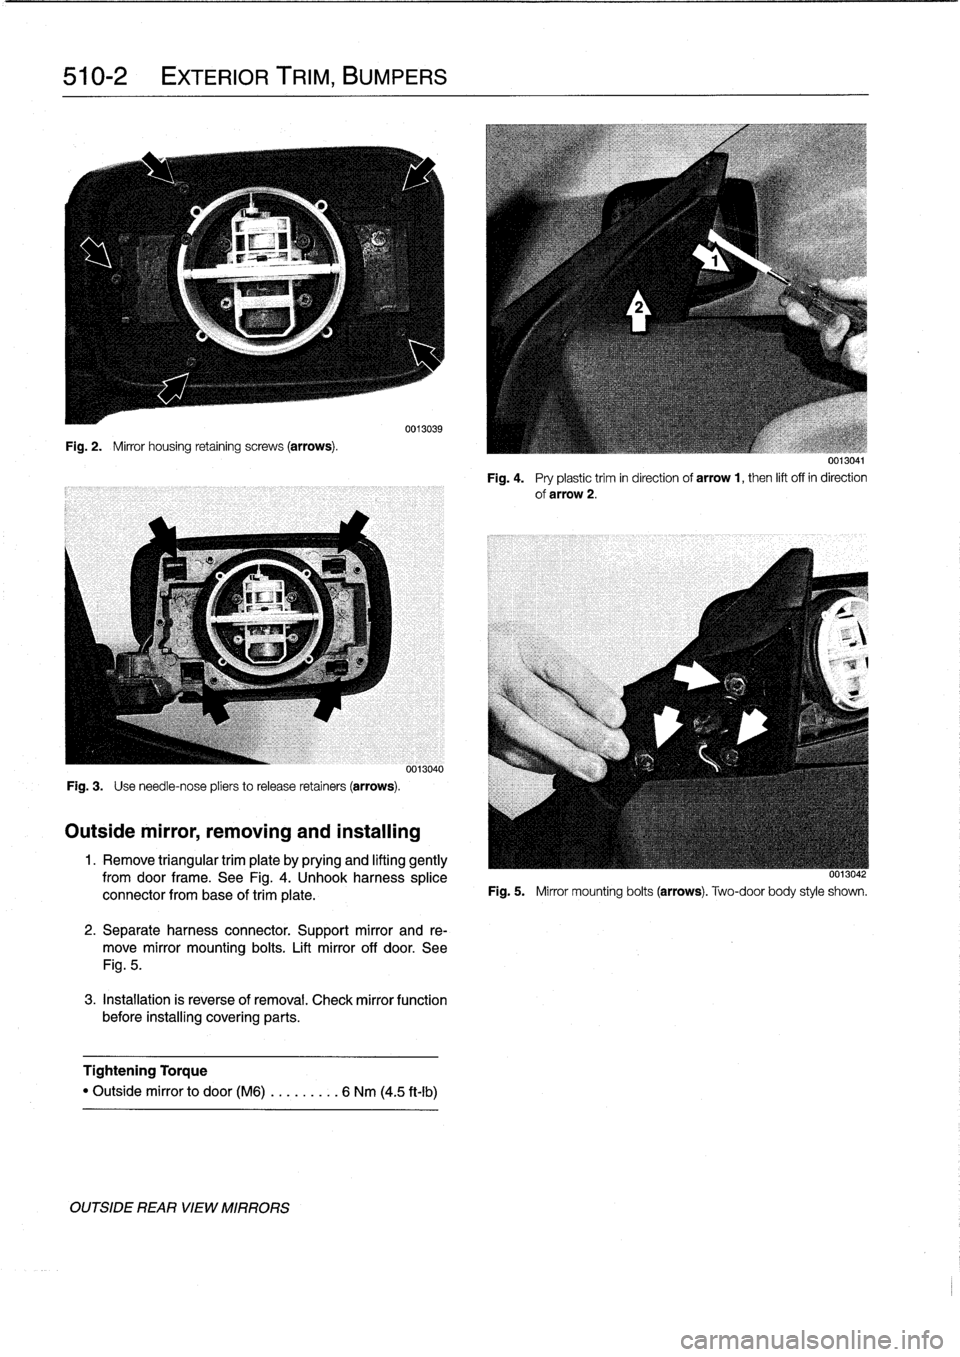 BMW 323i 1995 E36 Workshop Manual 
510-2

	

EXTERIOR
TRIIVI,
BUMPERS

Fig
.
2
.

	

Mirror
housing
retaining
screws
(arrows)
.

Fig
.
3
.

	

Use
need1e-nose
pliers
to
release
retainers
(arrows)
.

Outside
mirror,
removing
and
instal